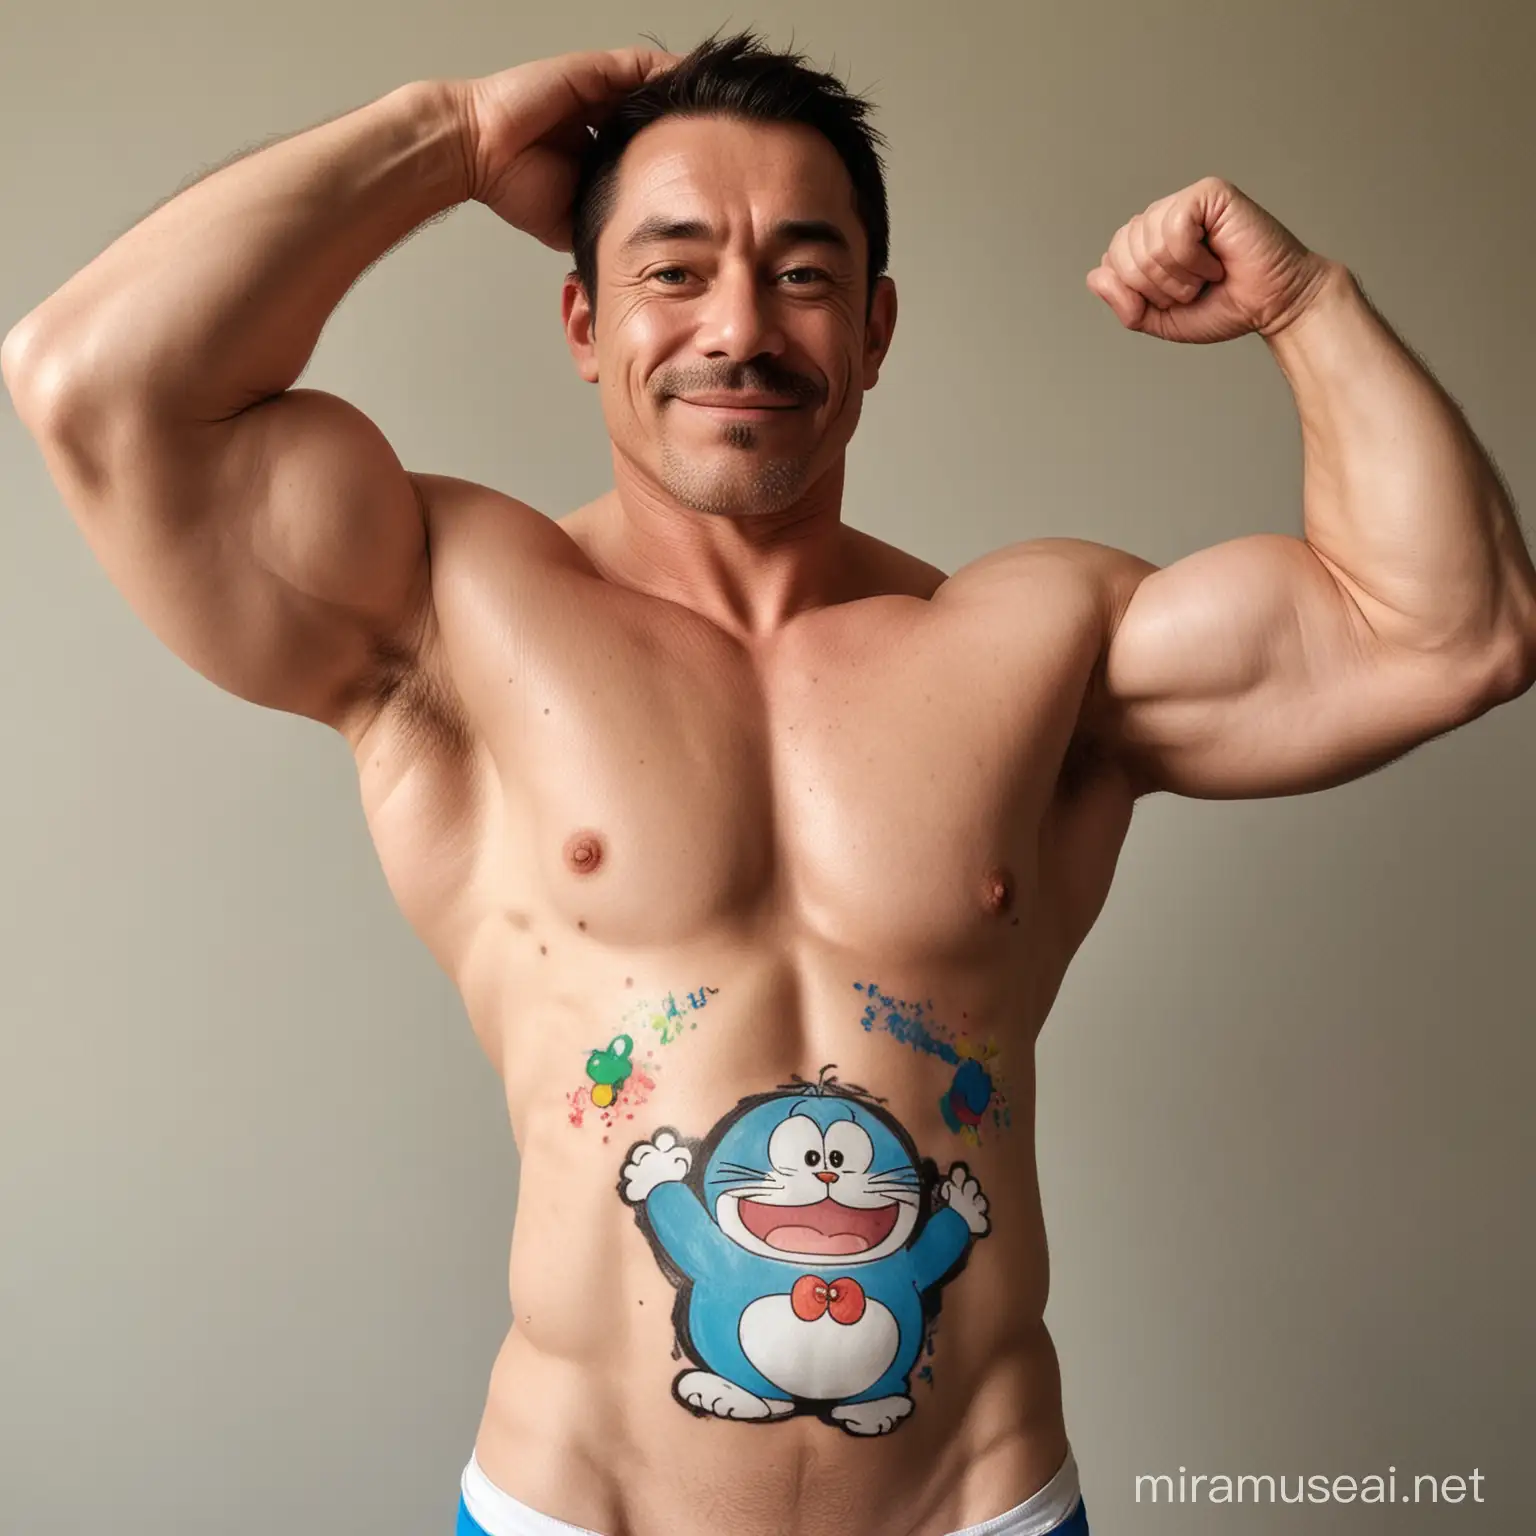 Topless 40s Ultra Beefy Happy Bodybuilder Daddy Glow in the Dark Highlighter Multi BRIGHT Coloured Ink Painted on every part of his body Doraemon and Flexing his Big Strong Arm